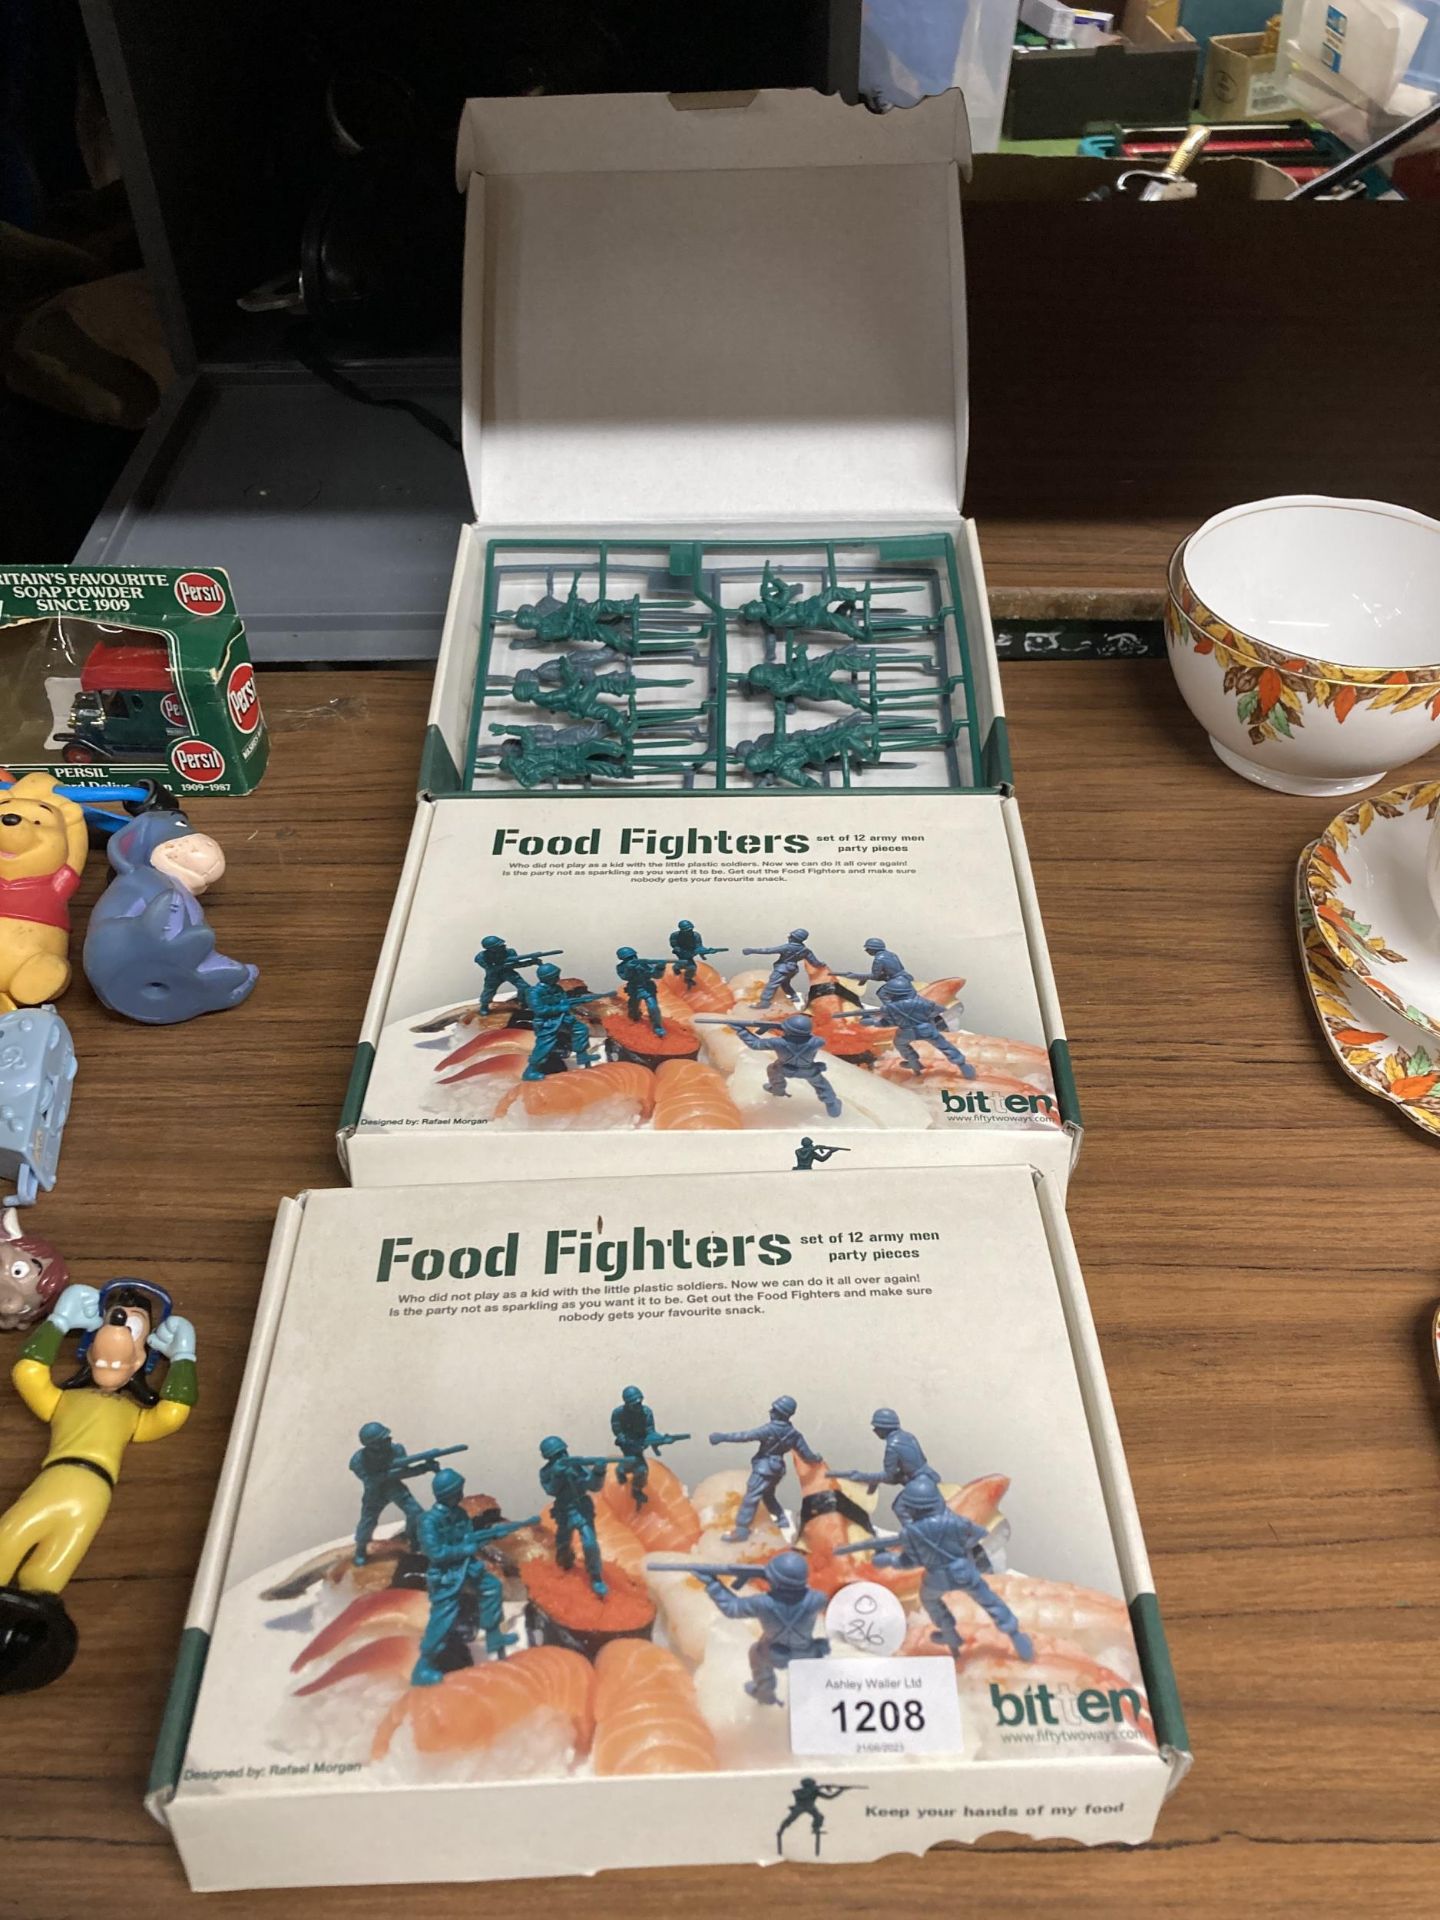 A MIXED LOT OF FOOD FIGHTERS ARMY MEN PARTY PIECES, BOXED